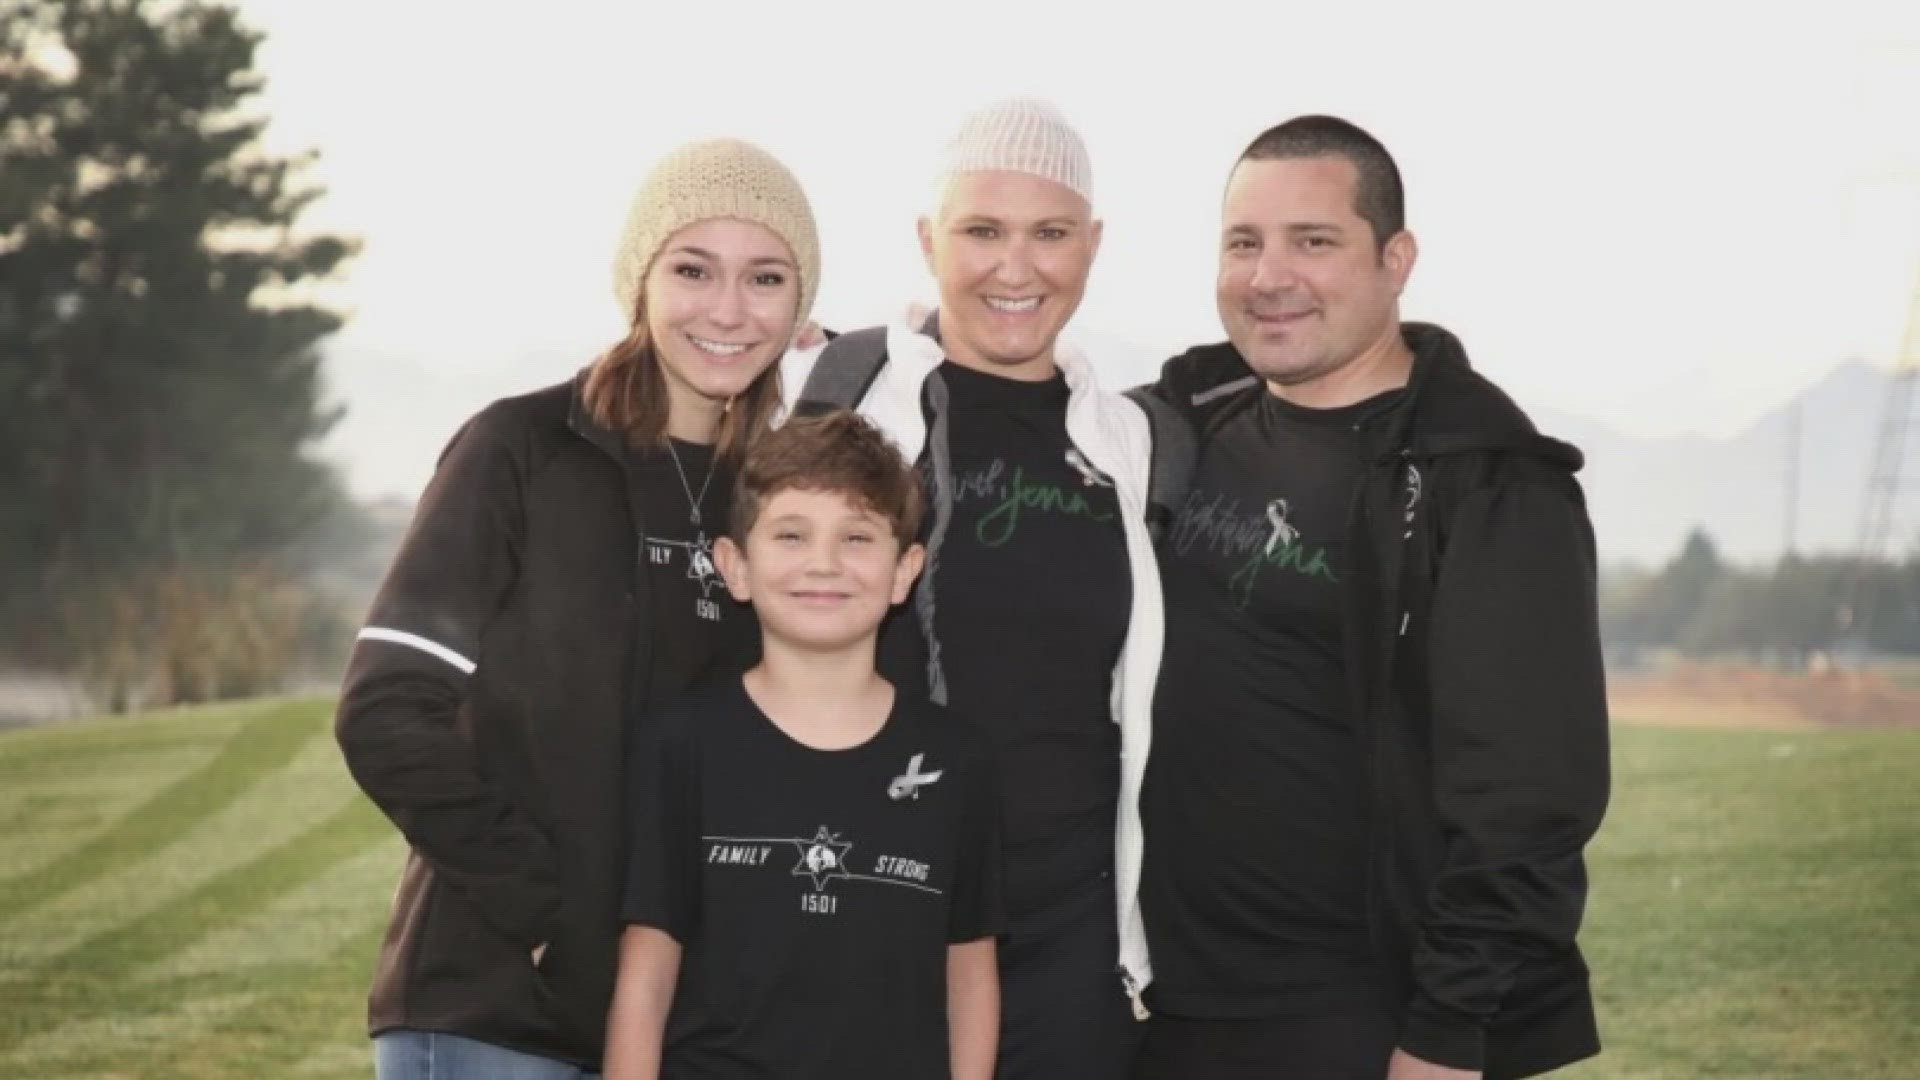 Jenn Ortiz is fighting a recurrence of her glioblastoma tumor, and is currently enrolled in one of several trials at Ivy Brain Tumor Center in Phoenix.